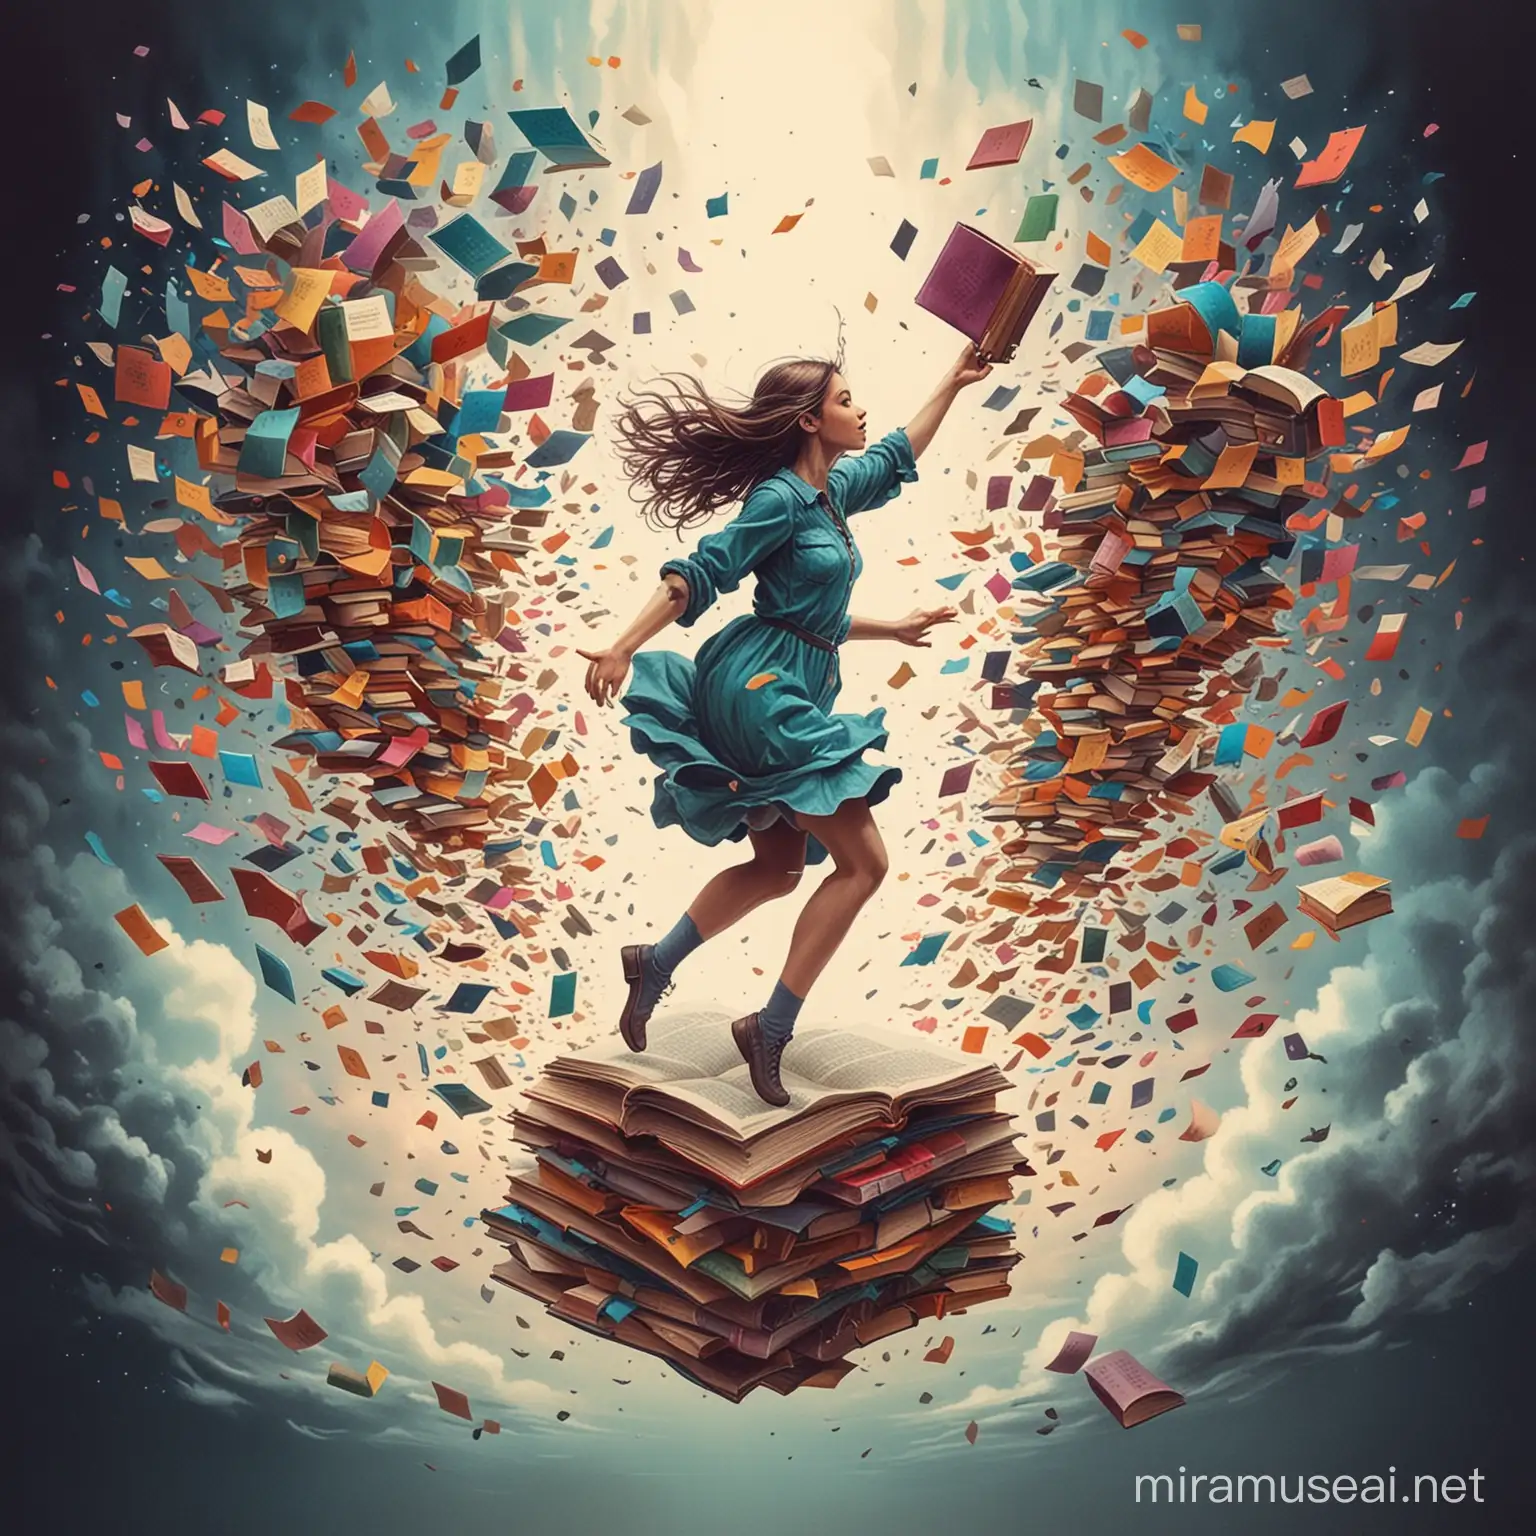 Something surreal with a girl, flying books, colorful ink art